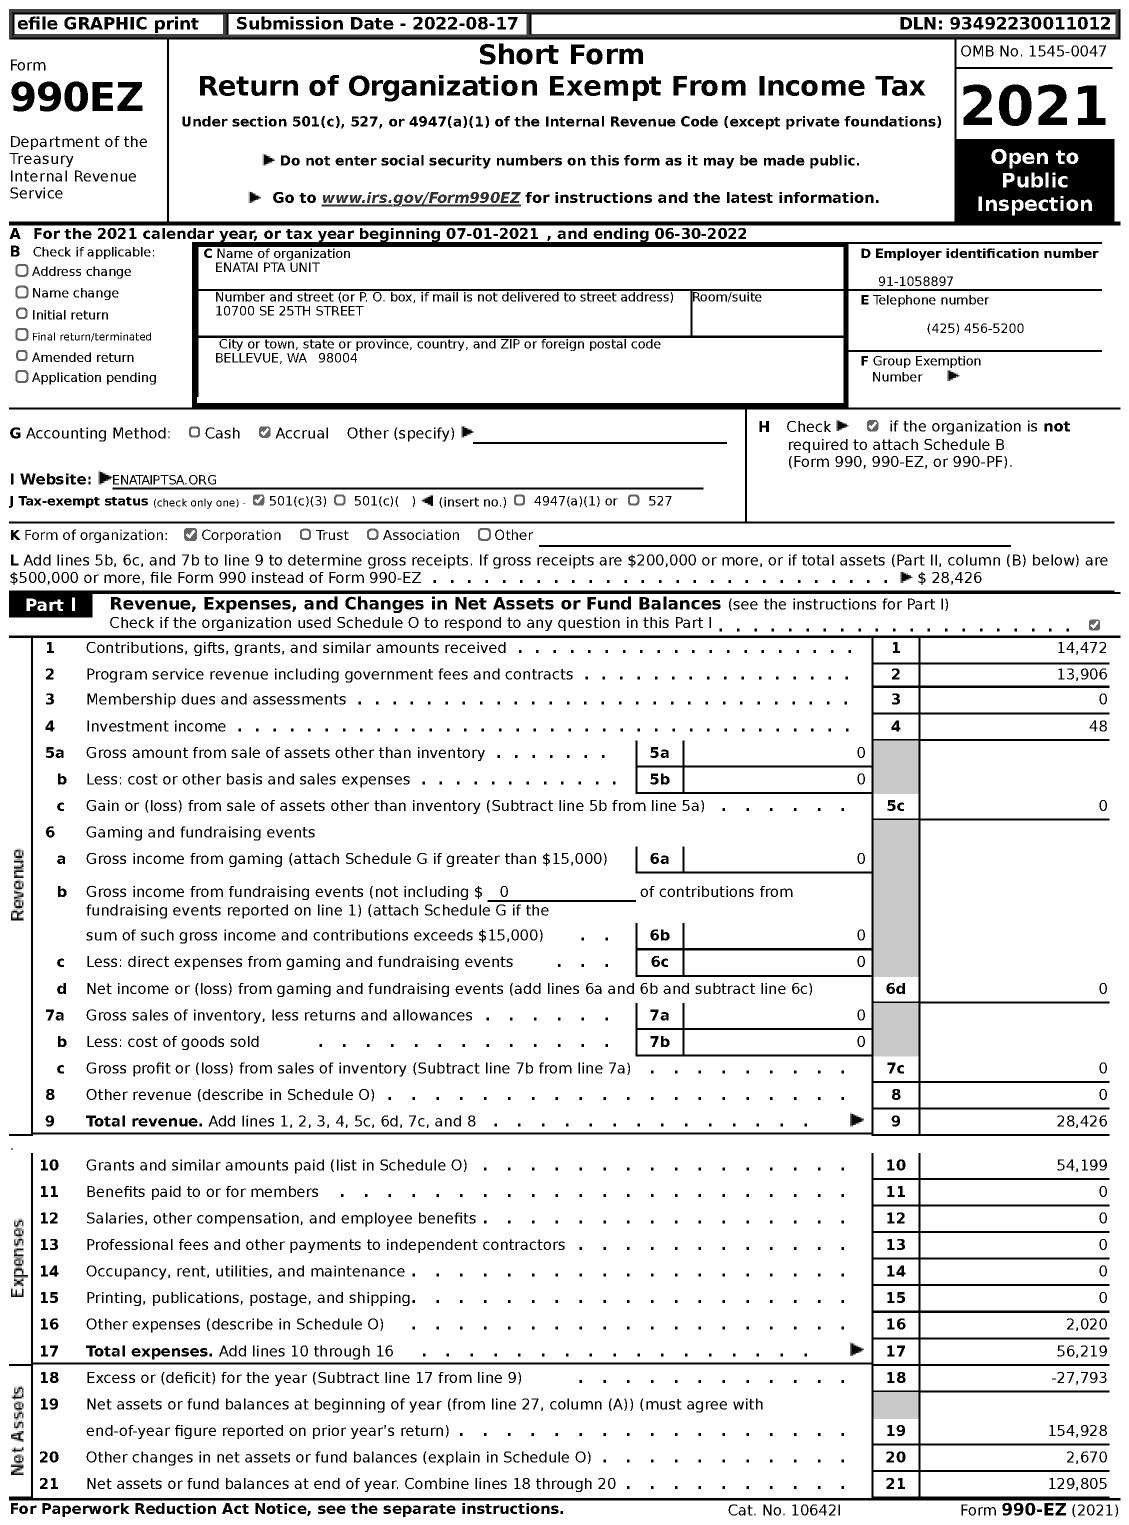 Image of first page of 2021 Form 990EZ for Enatai PTA Unit